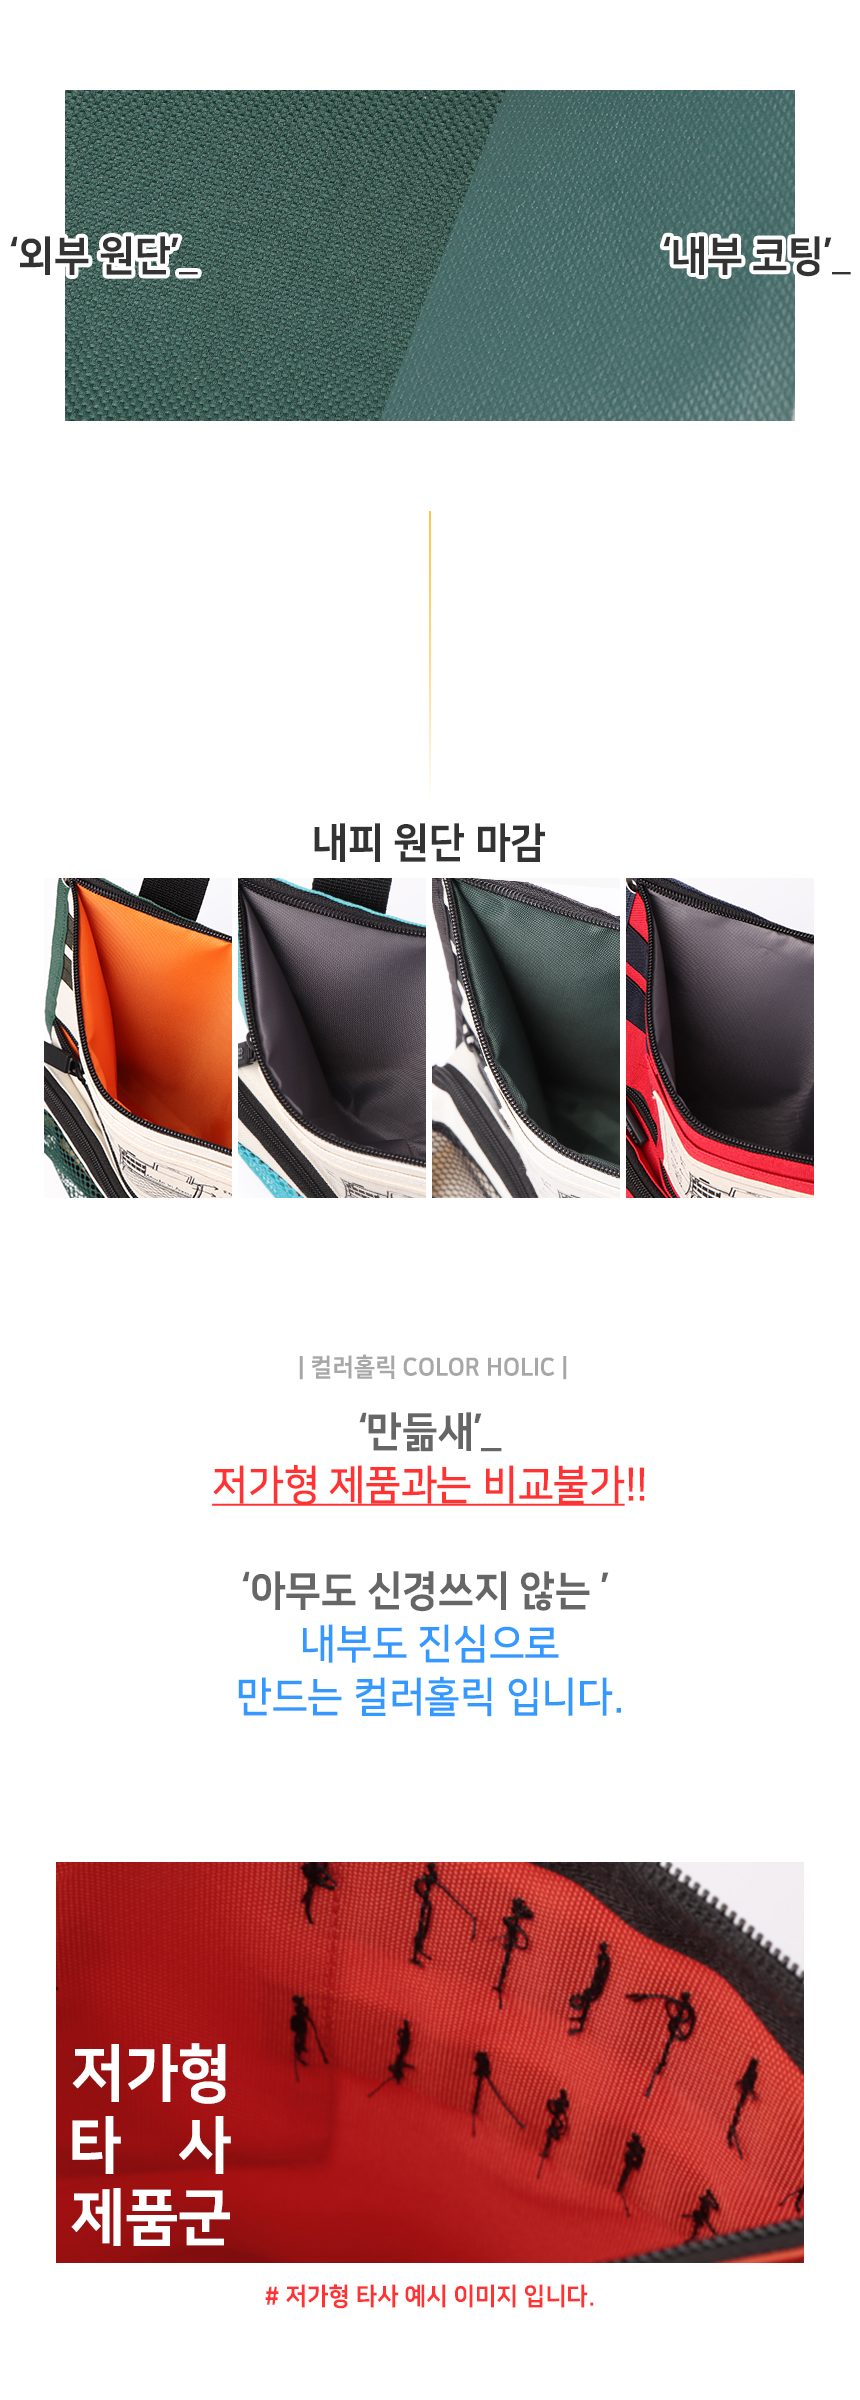 colorholic_golfcart_organizer_pouch_rok_06_page_title_story_box1.jpg